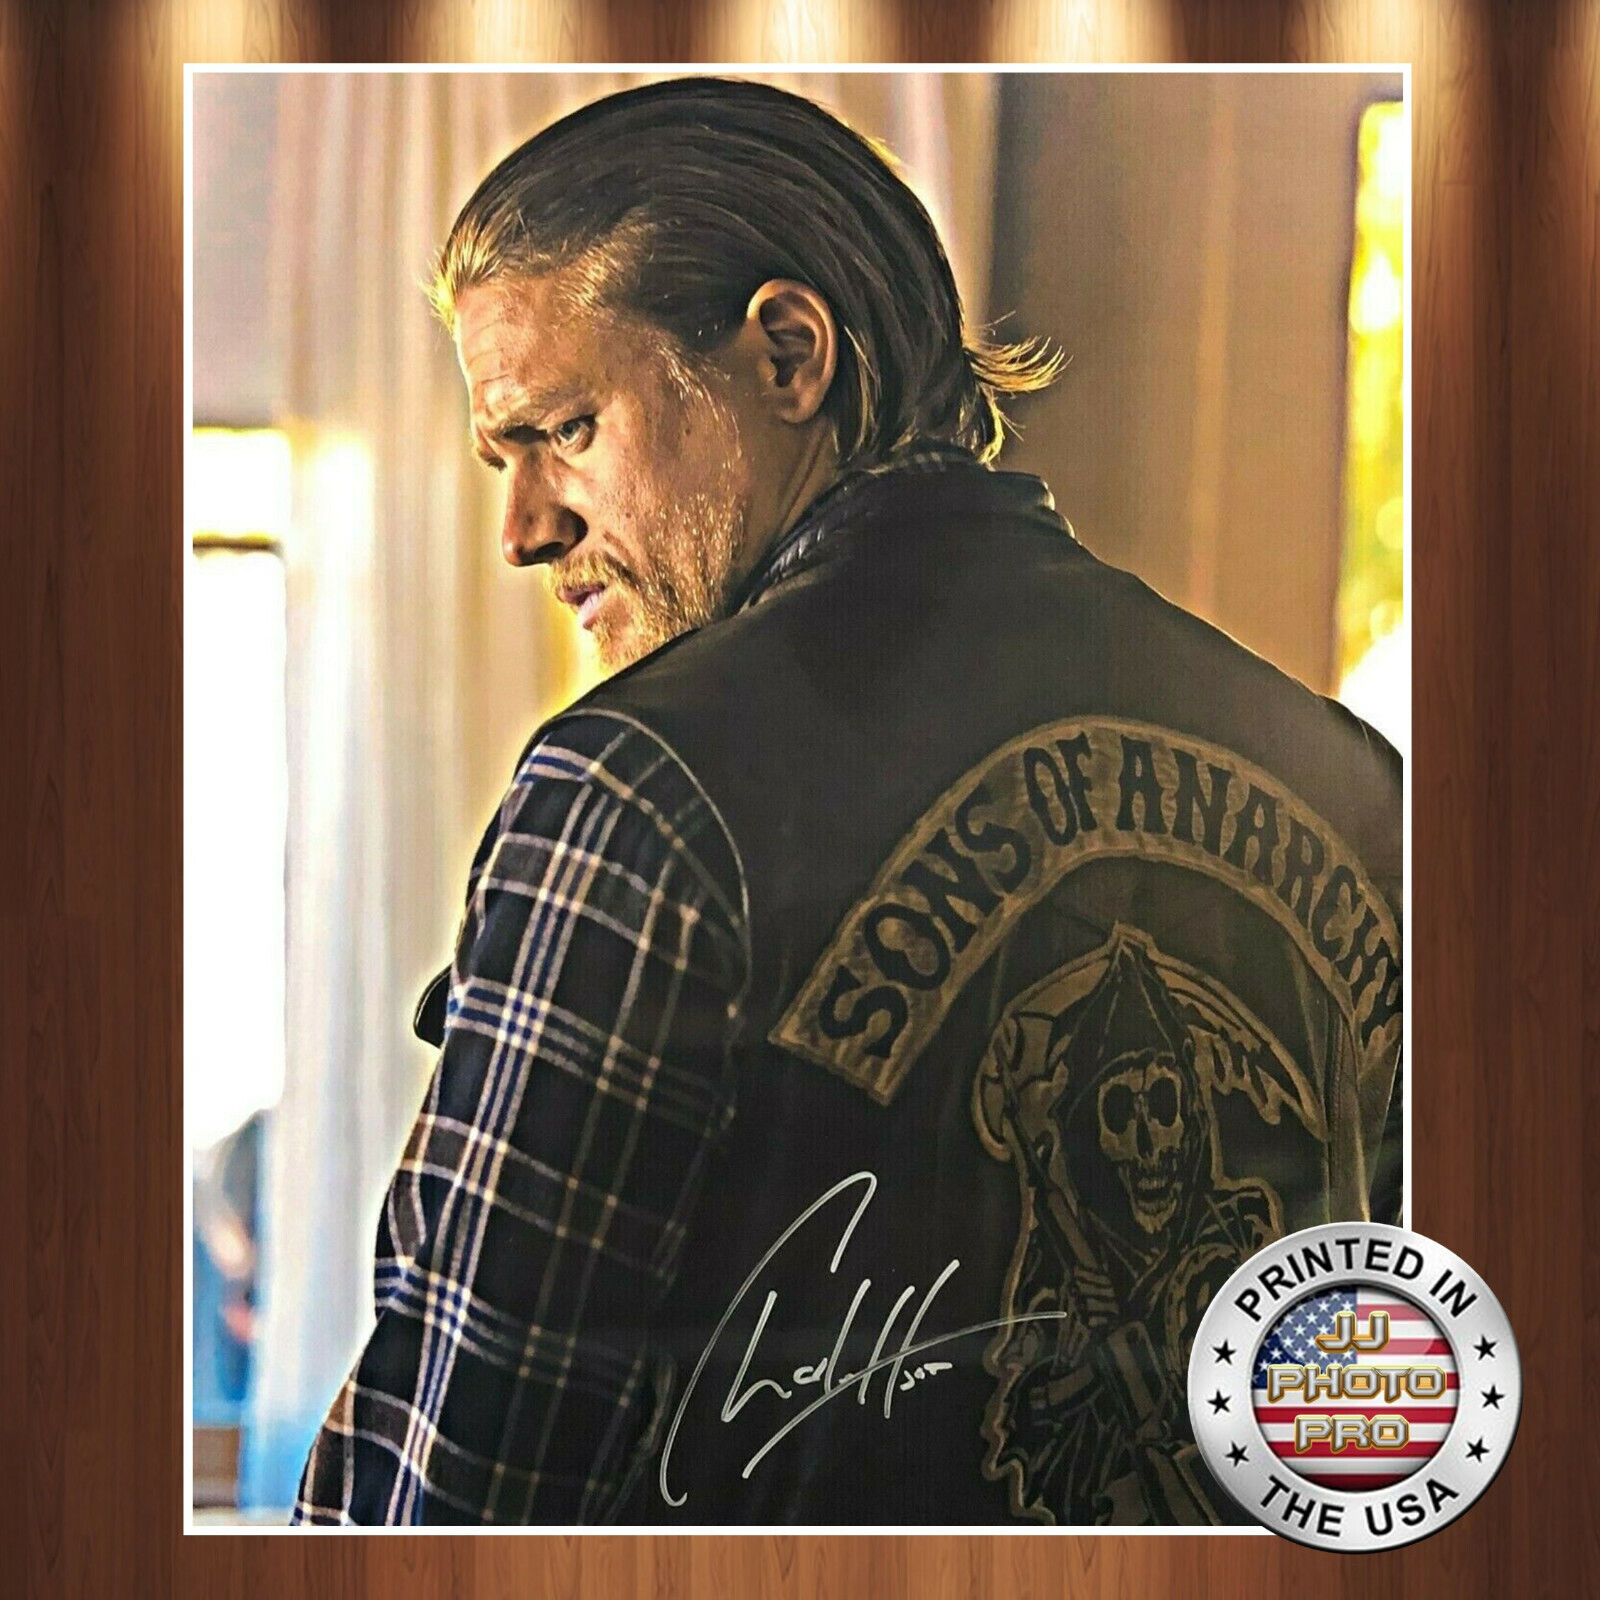 Charlie Hunnam Autographed Signed 8x10 Photo Poster painting (Sons of Anarchy) REPRINT